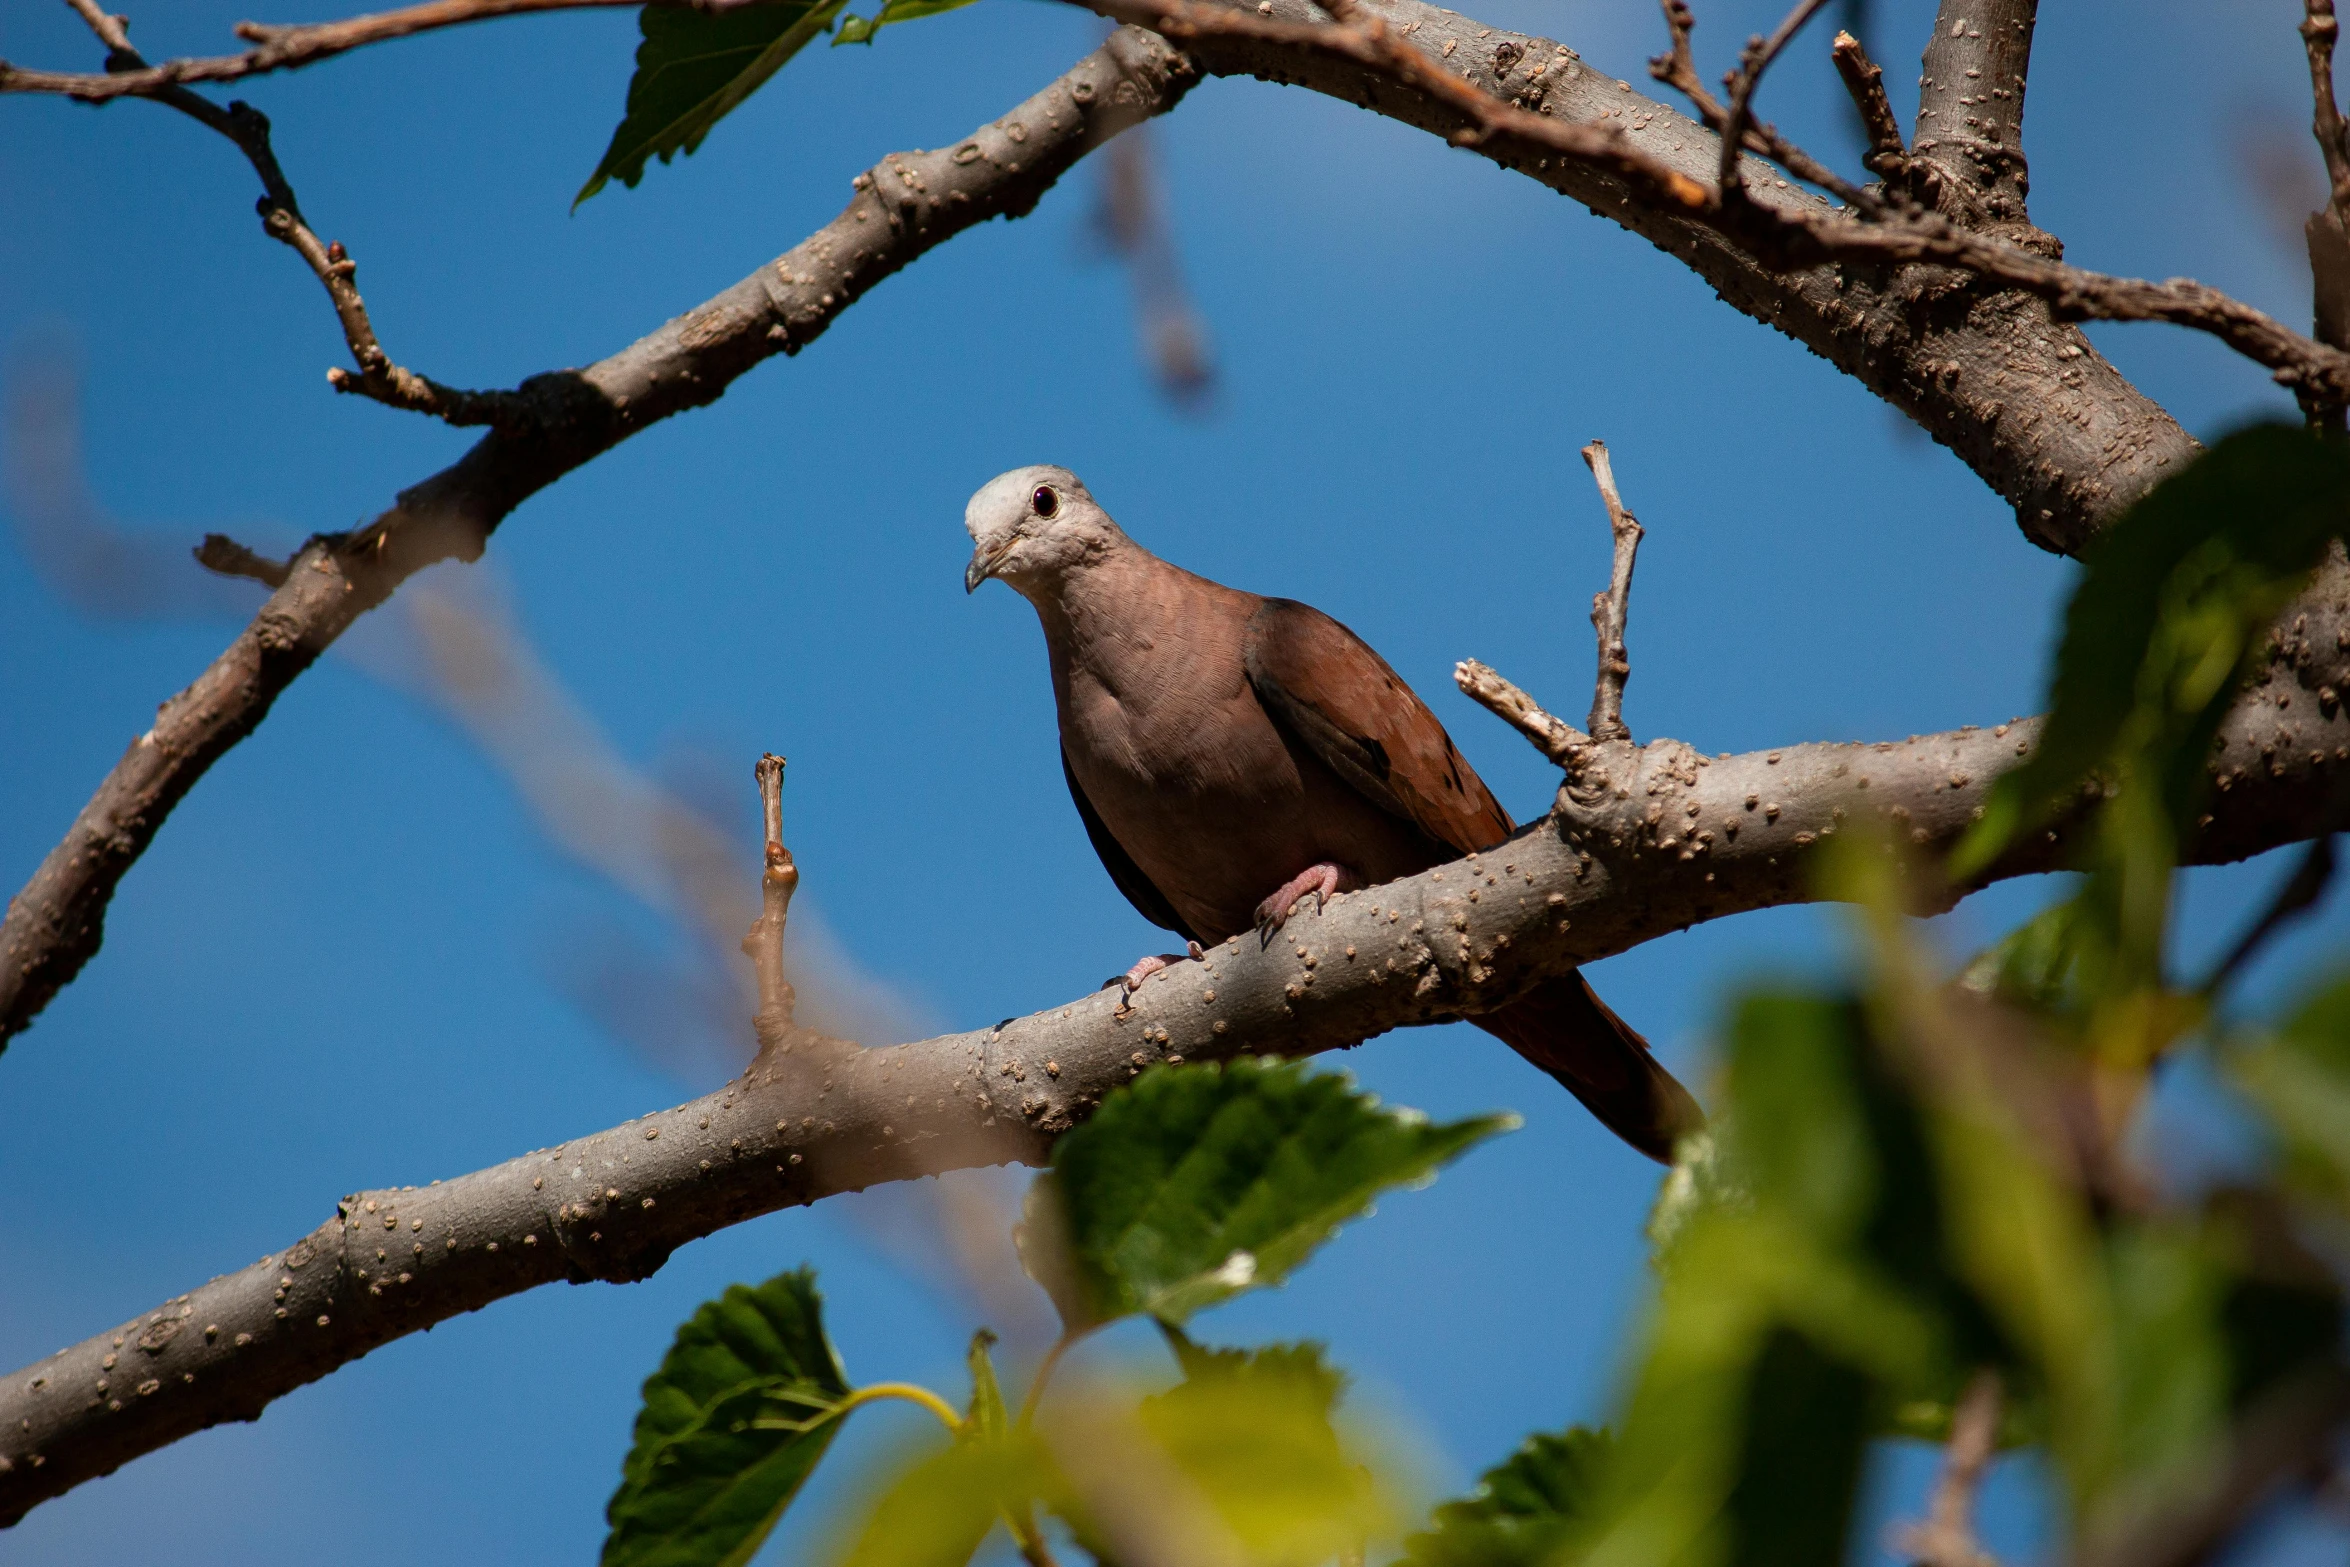 an image of a brown bird sitting on a tree nch